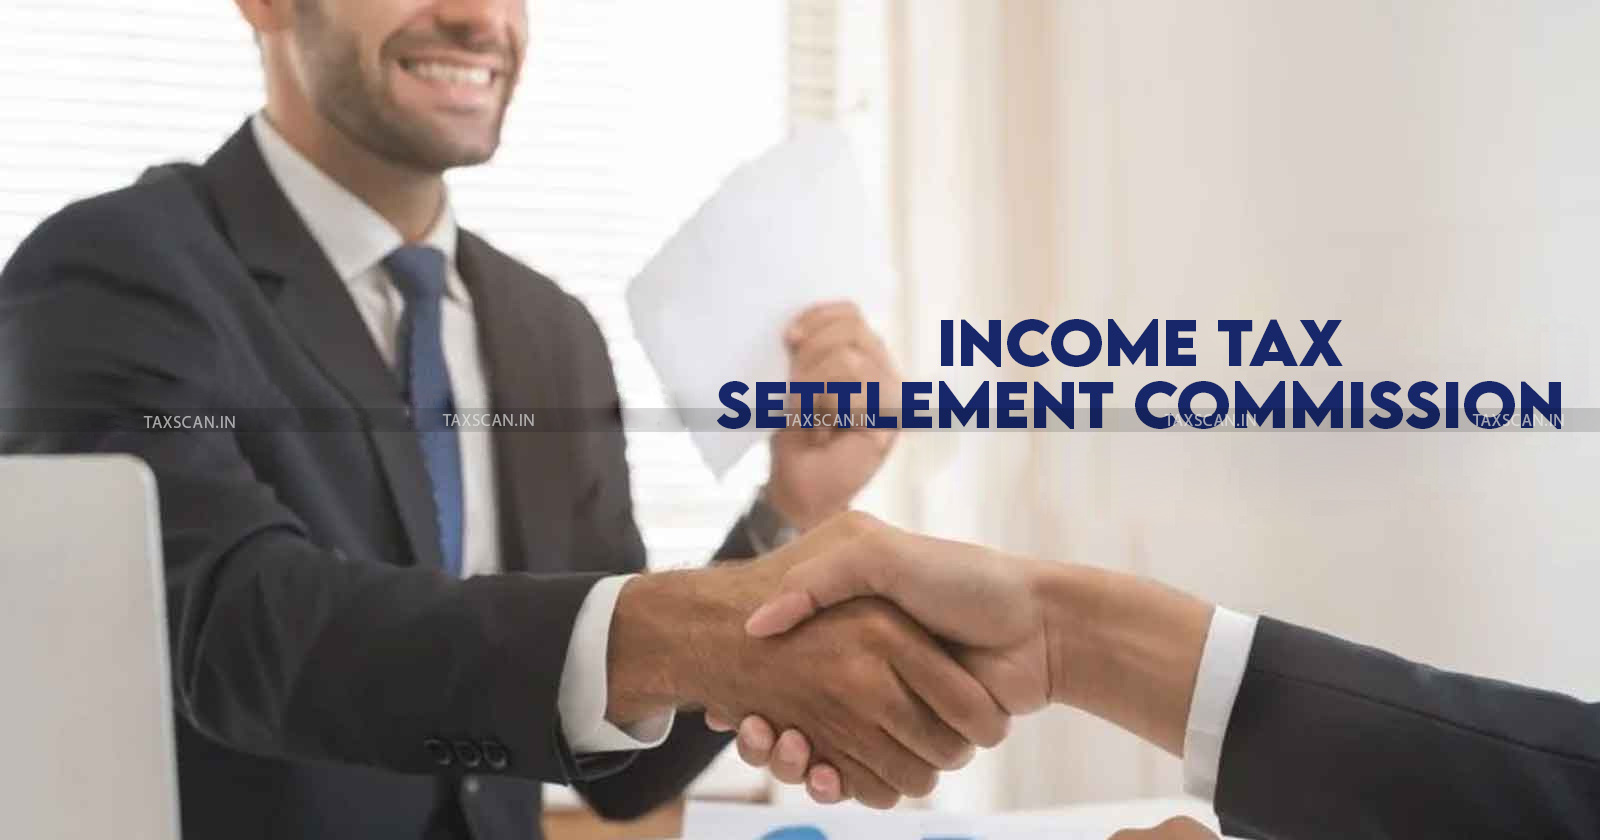 Delhi High Court - Income Tax - Income Tax Settlement Commission - ITSC - TAXSCAN